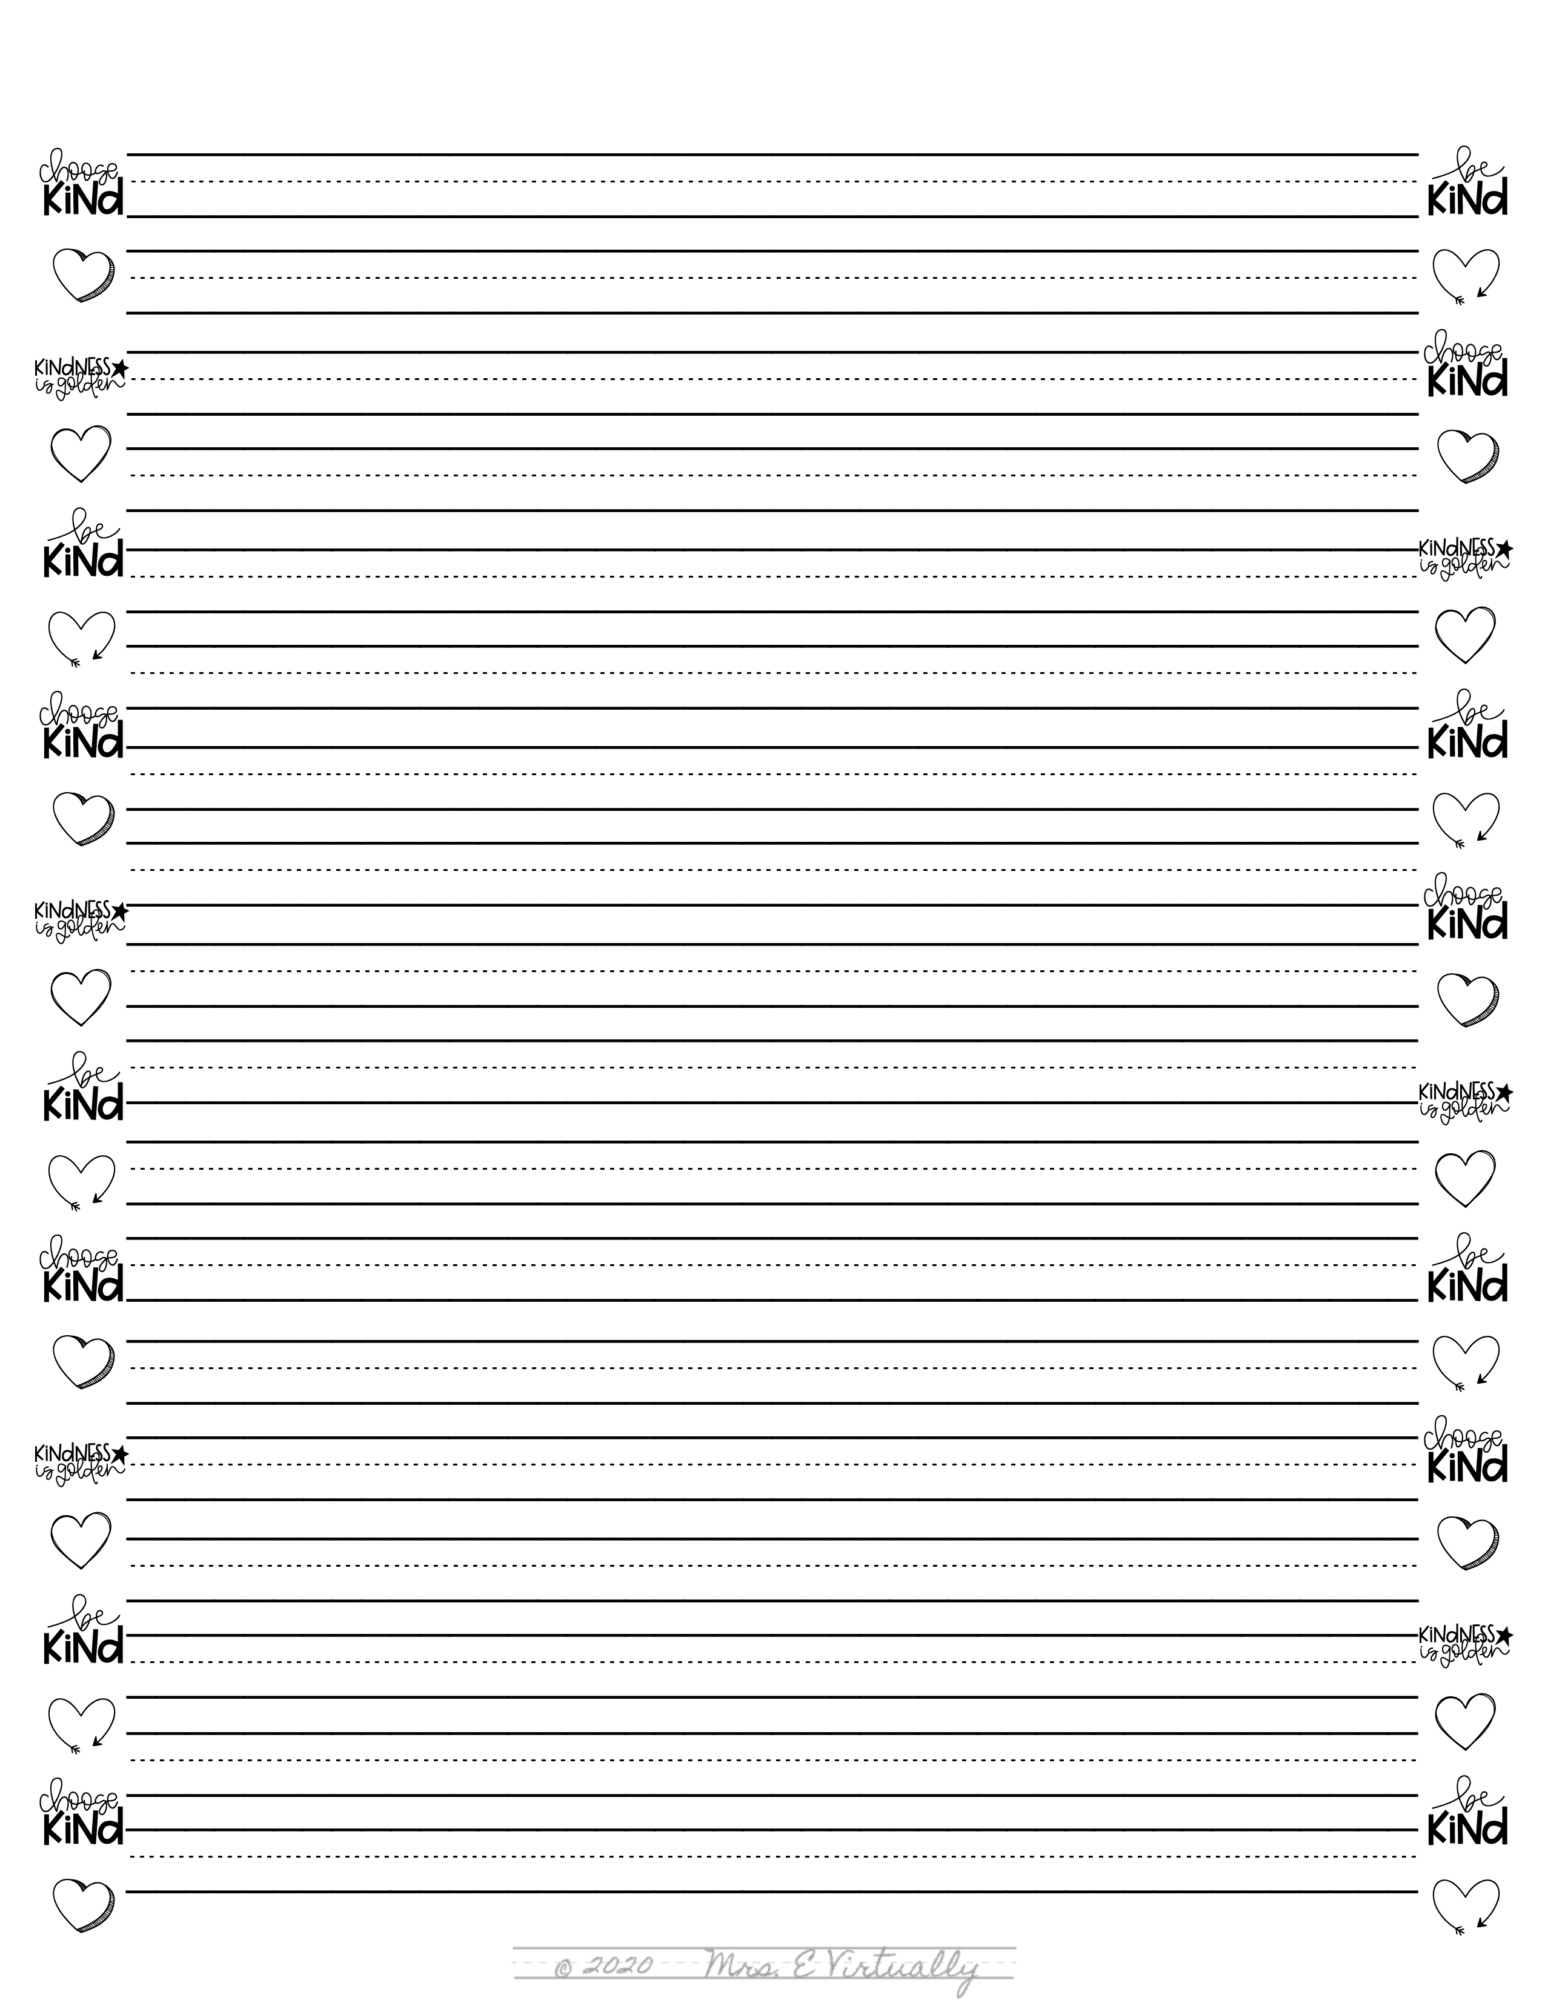 primary-lined-writing-paper-printable-winter-themed-mrs-e-virtually